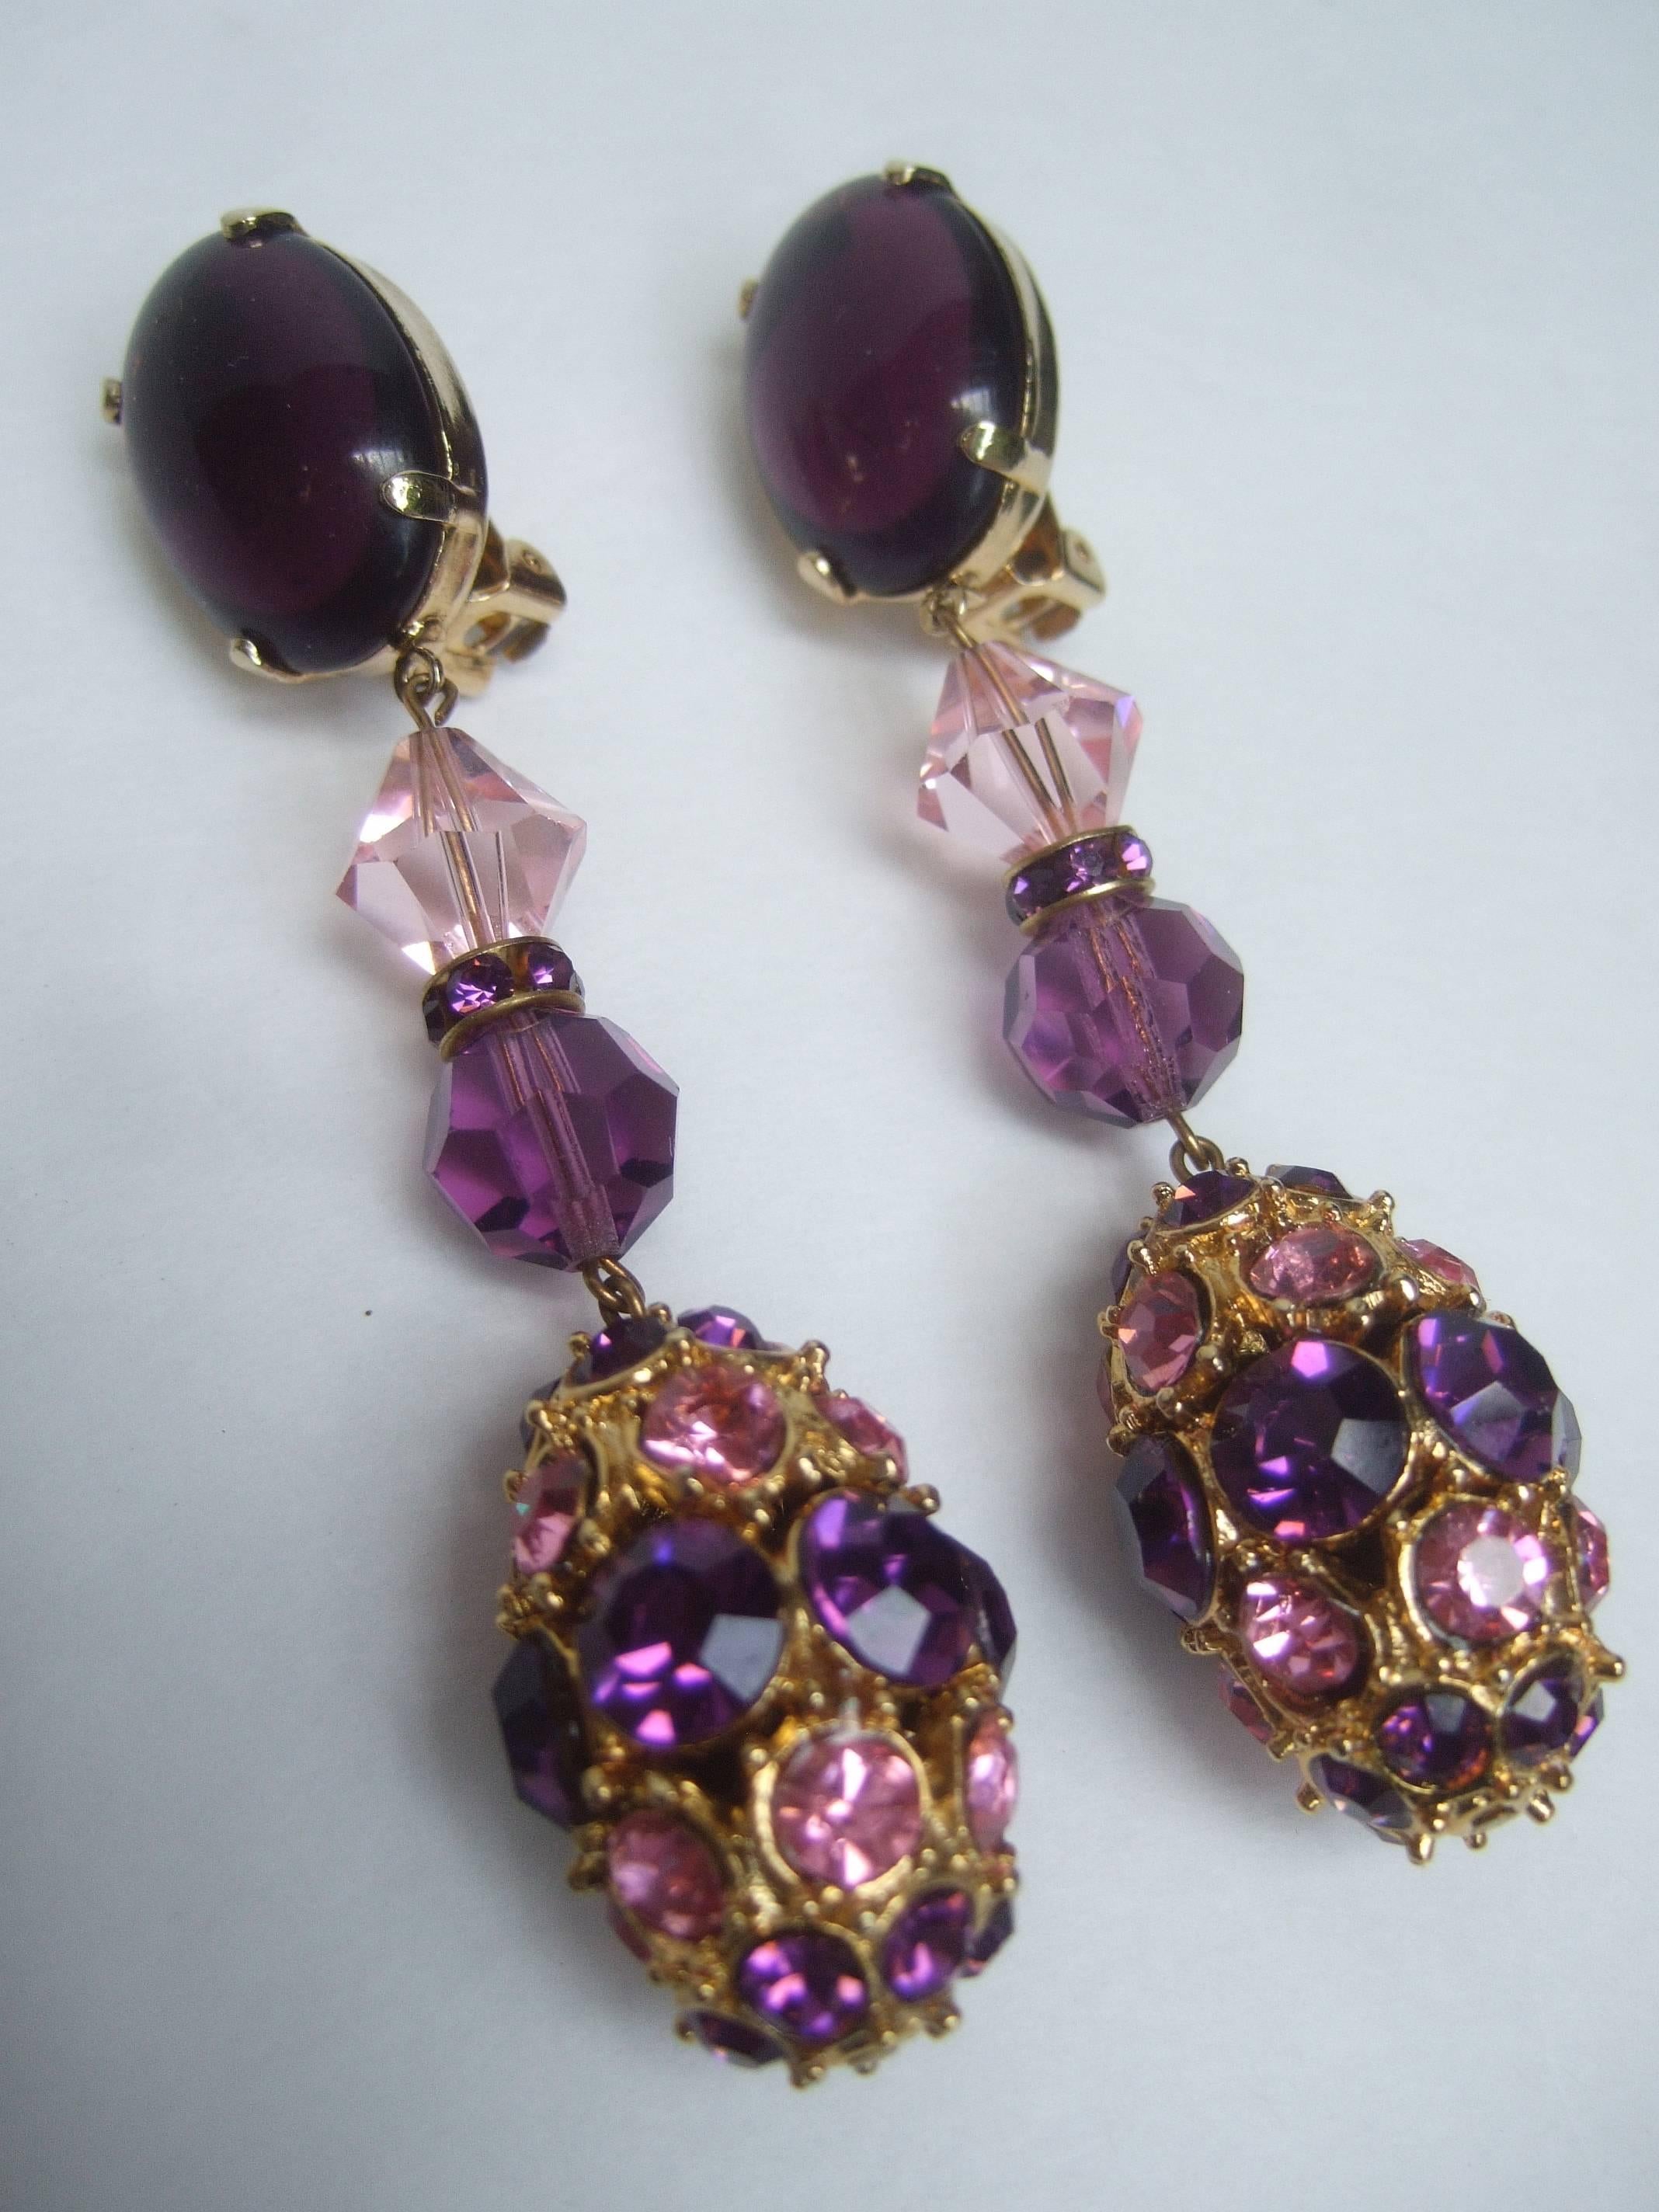 Massive glittering amethyst crystal dangling earrings c 1970
The crystal encrusted earrings are embellished 
with brilliant purple and pink crystals in various
shapes and sizes

The top of the clip on earrings are adorned 
with a large oval